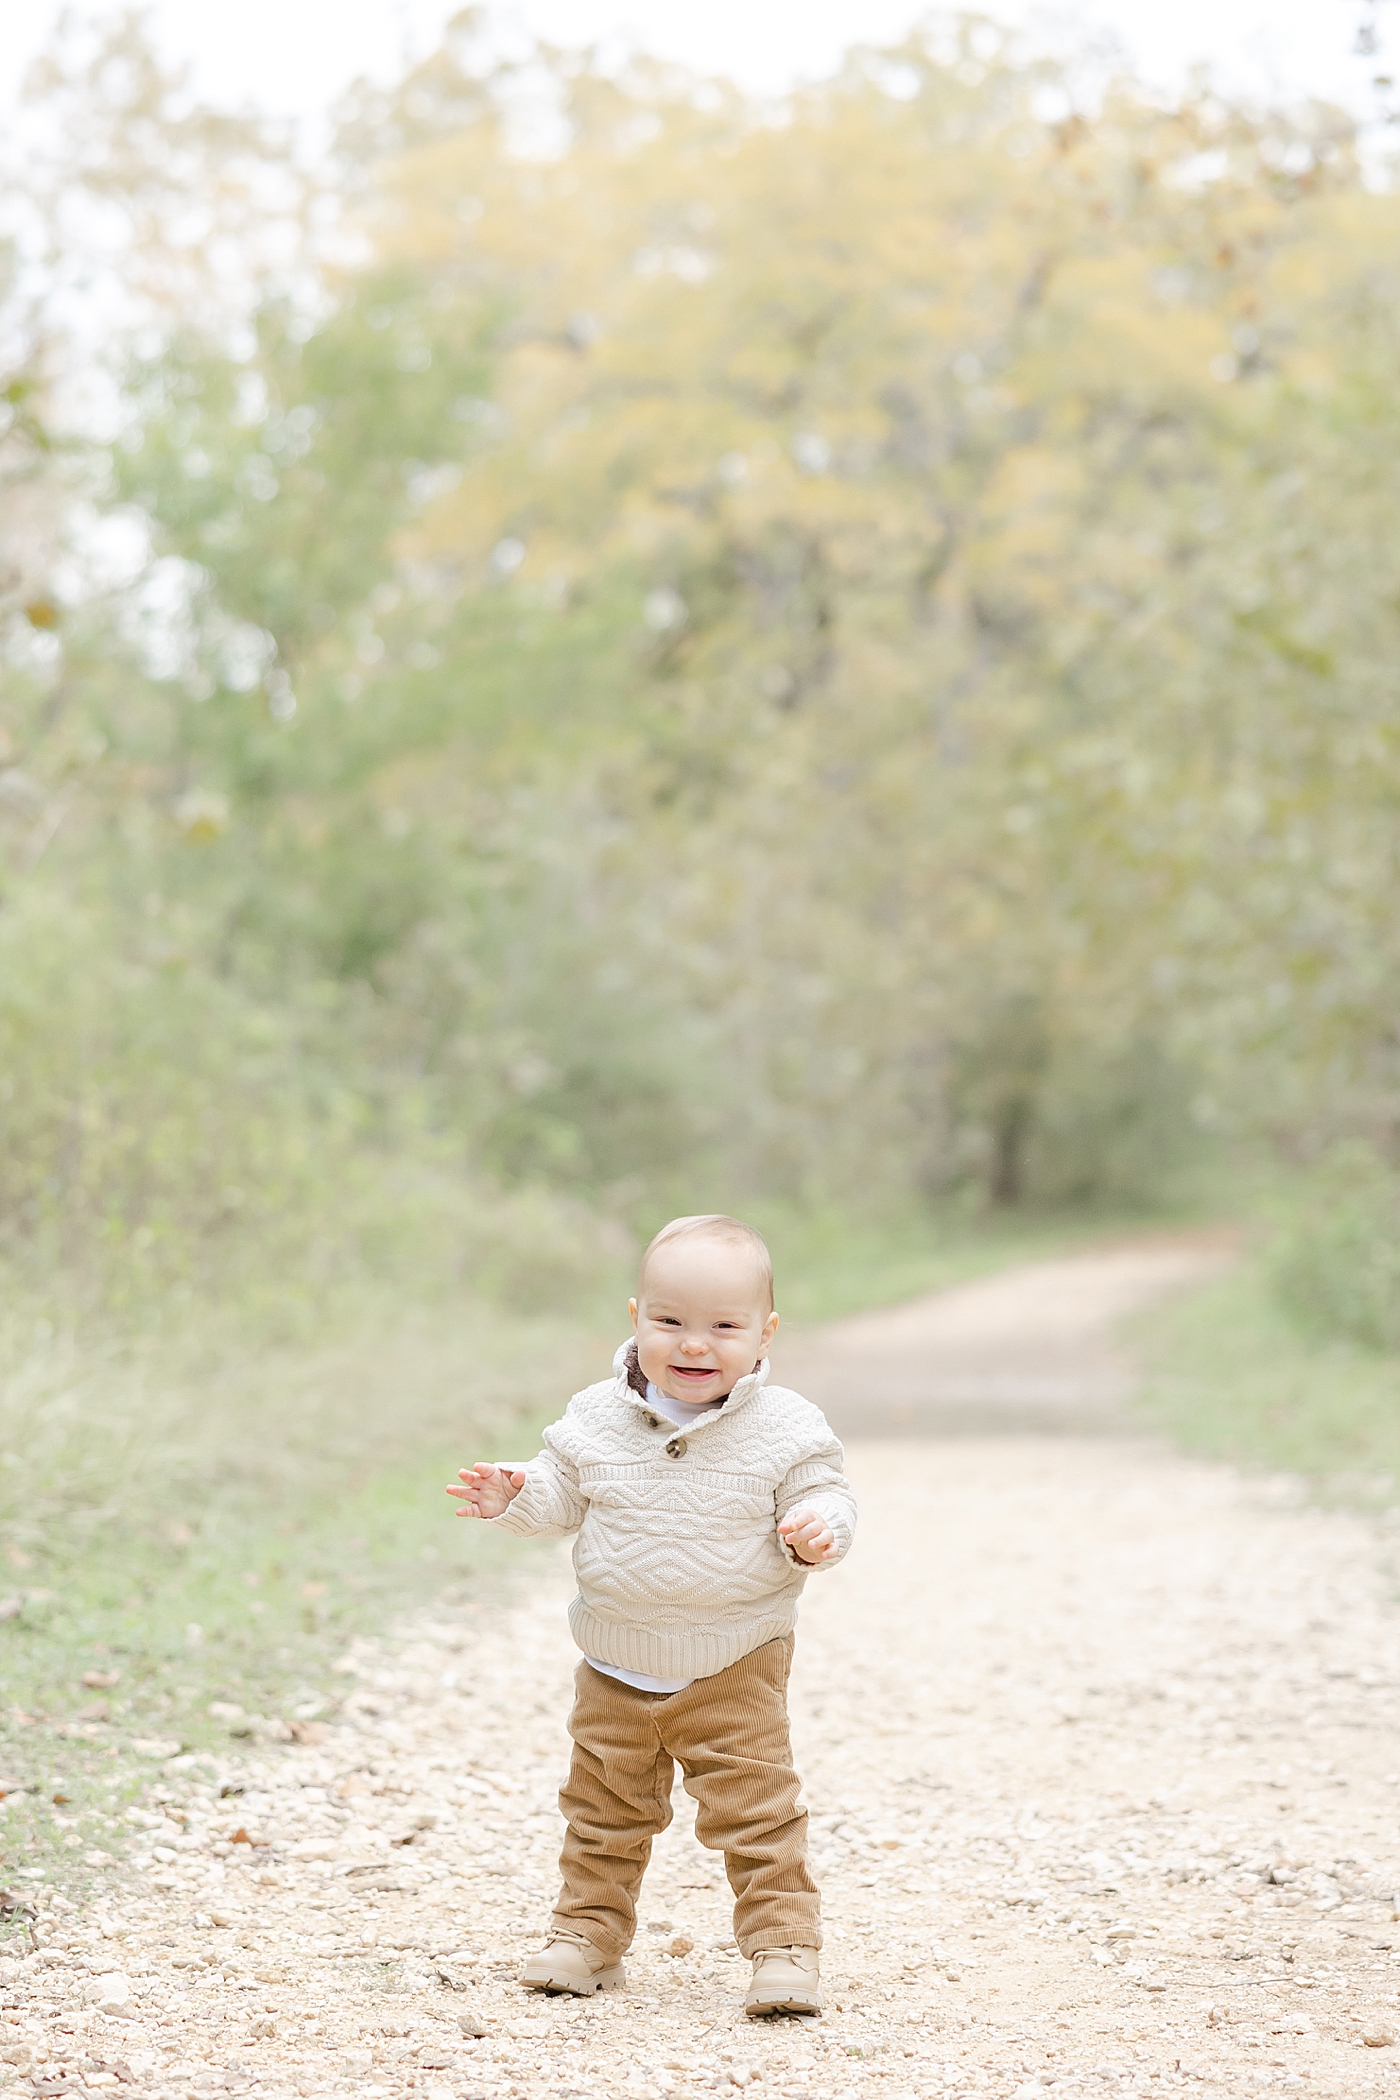 Baby boy standing on a dirt path during their Spring Family Sessions in Austin | Image by Sana Ahmed Photography